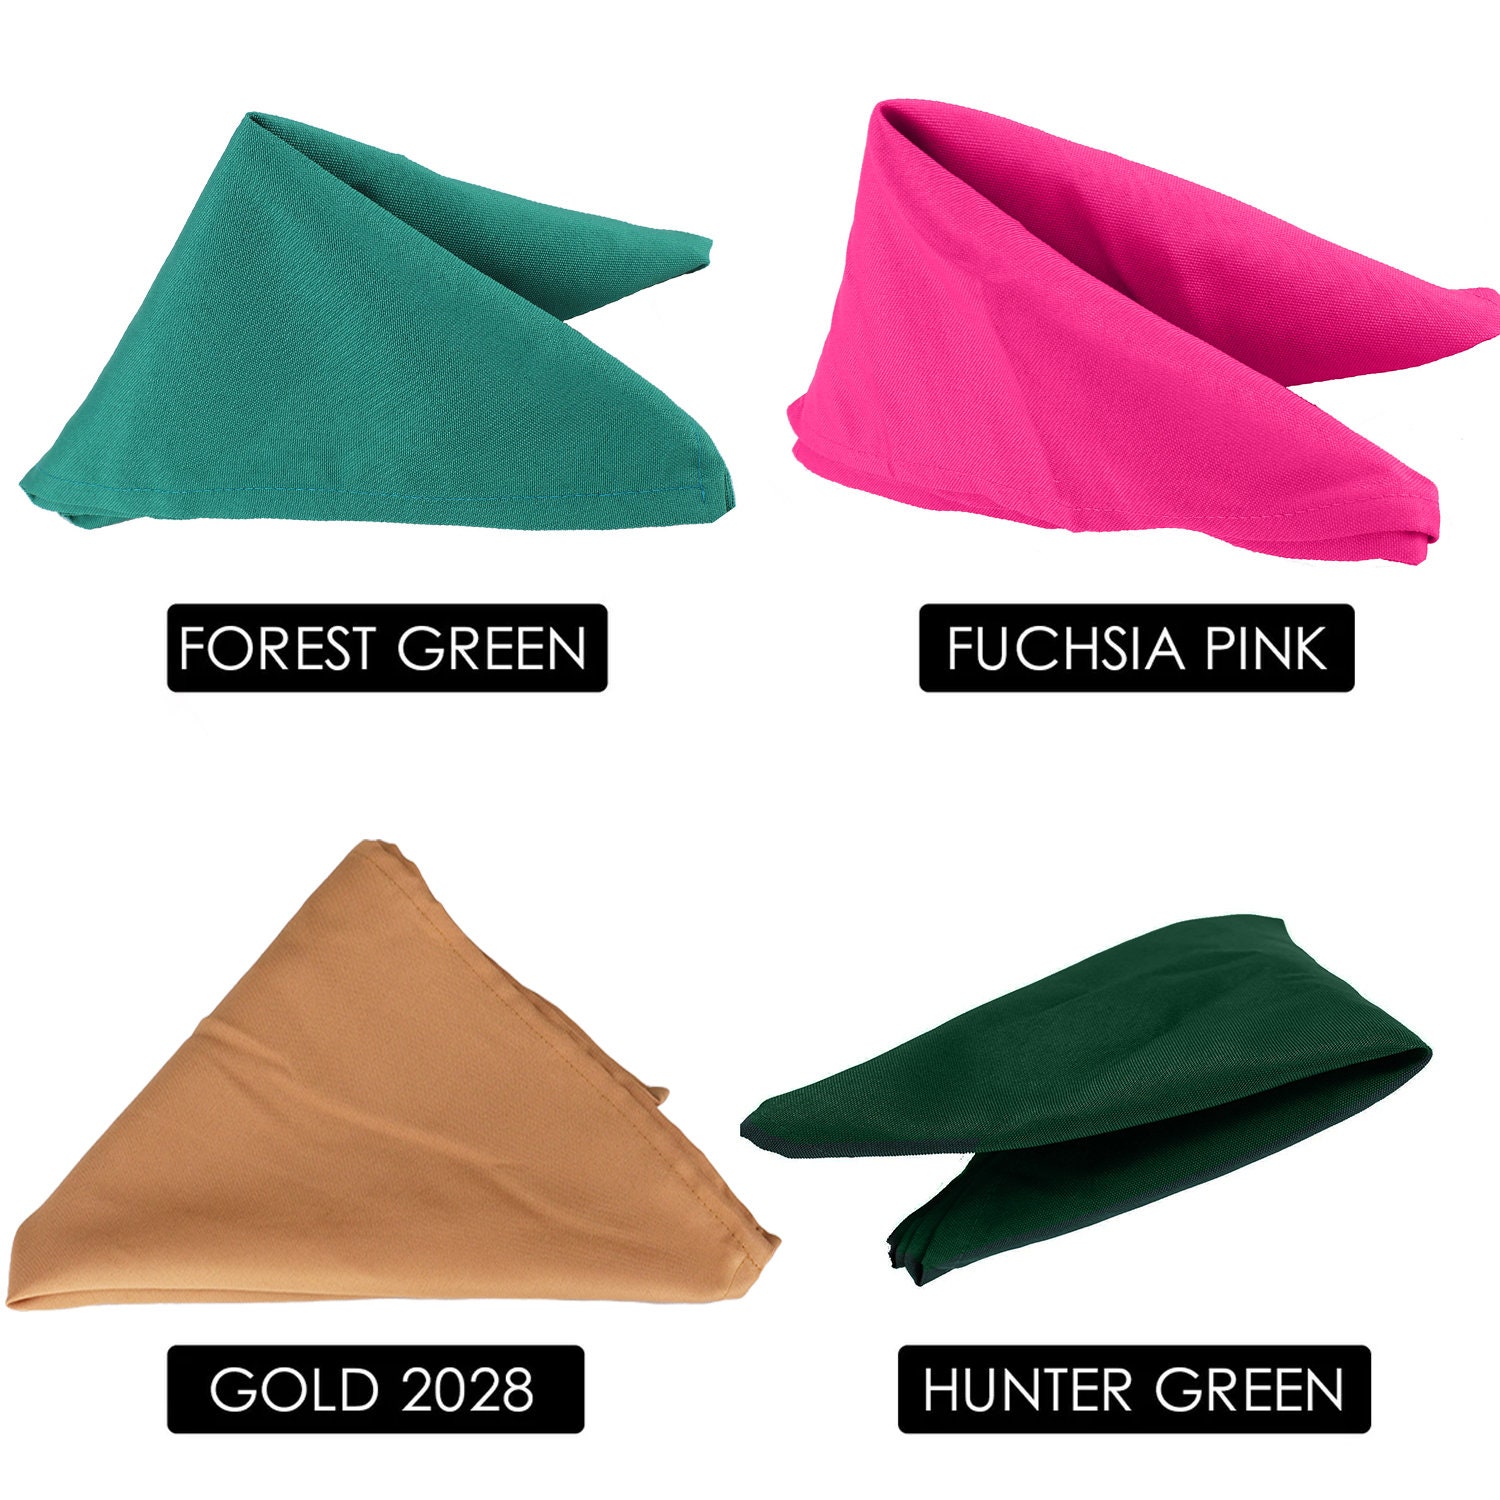 Polyester Cloth Napkins Colors Sample Pack – Bridal Tablecloth